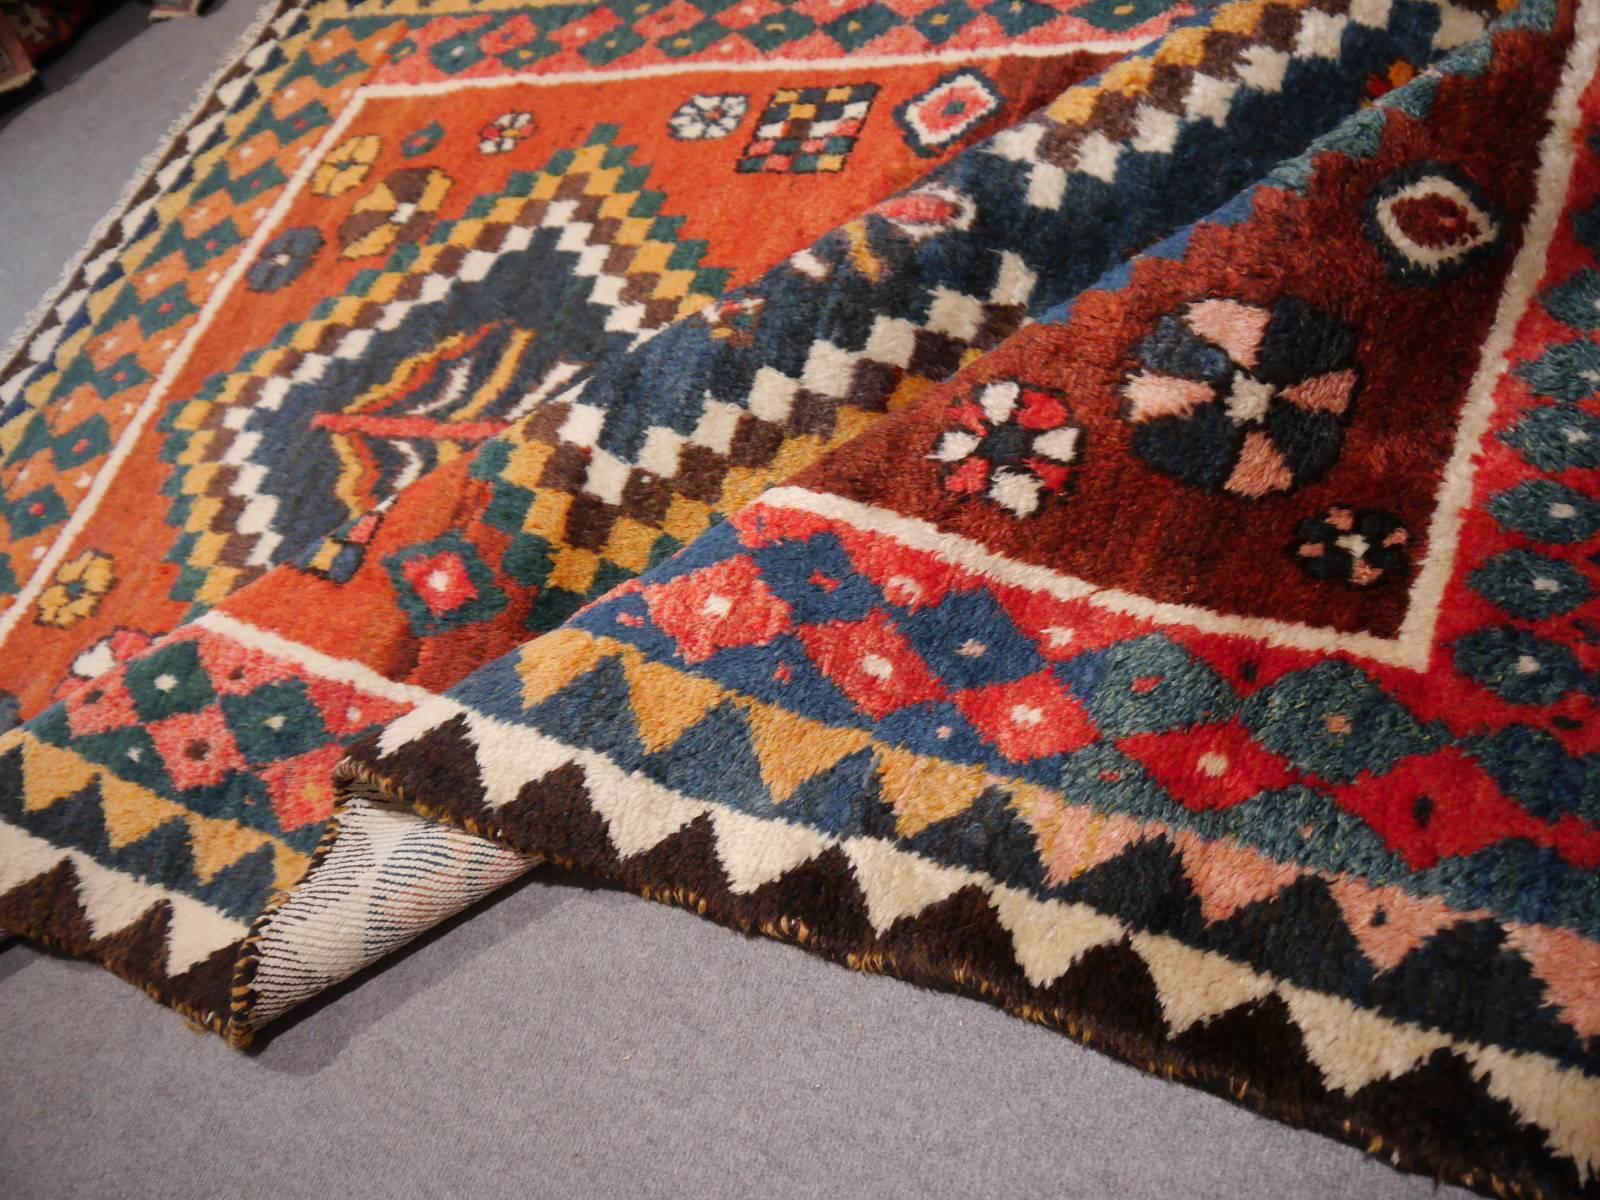 Beautiful vintage/semi antique Mid-Century tribal rug. Hand-knotted in Persia using handspun wool and natural dyes. Think plush pile and wool with beautiful luster. Measures: 7.9 x 5.0 / 240 x 150 cm.